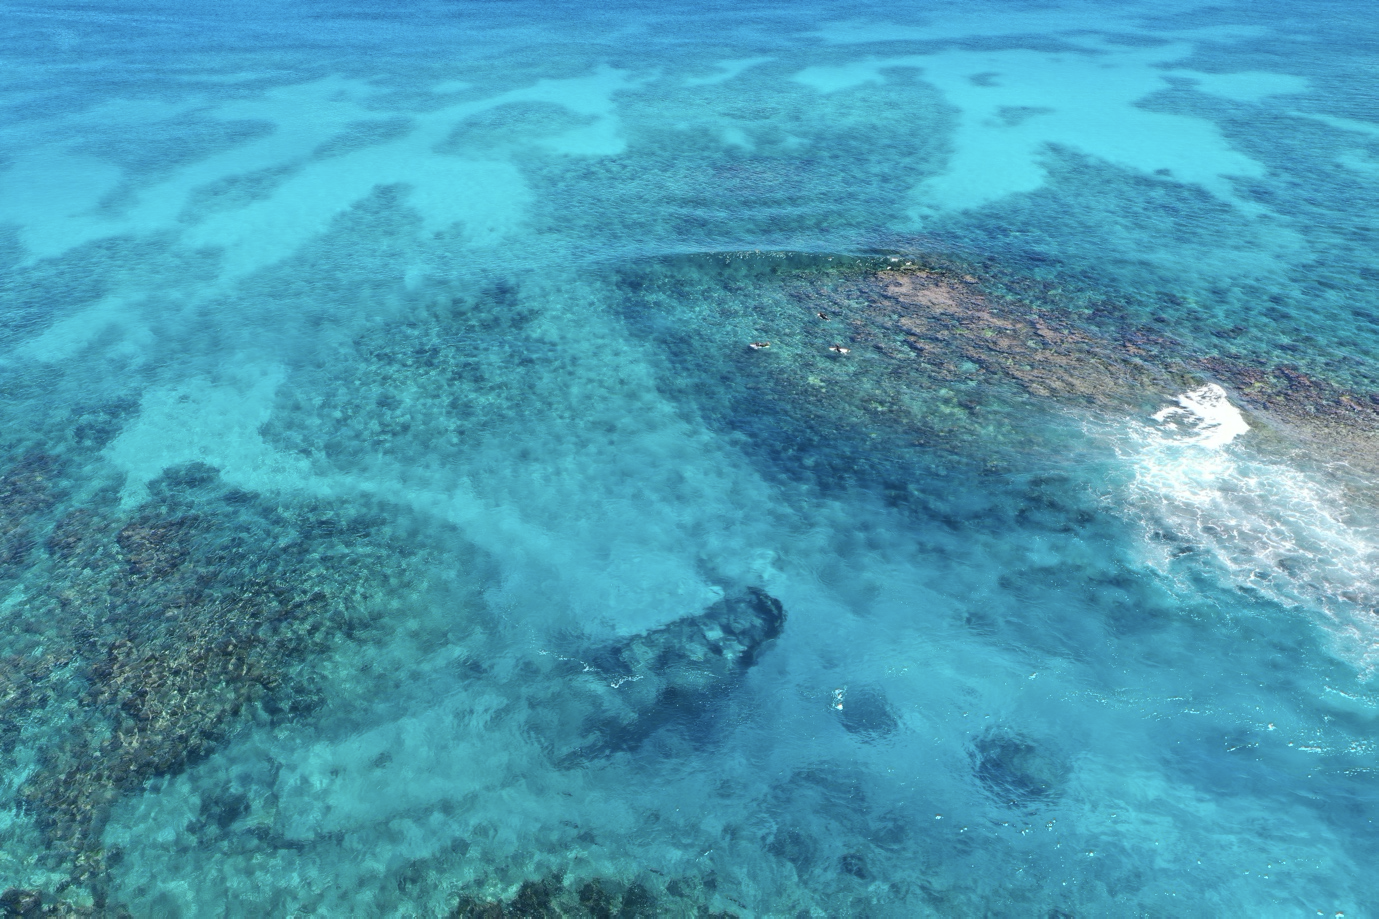 Surfing at “Shipwreck Reef,” Middleton Reef. Image by Captain Nate Porter.